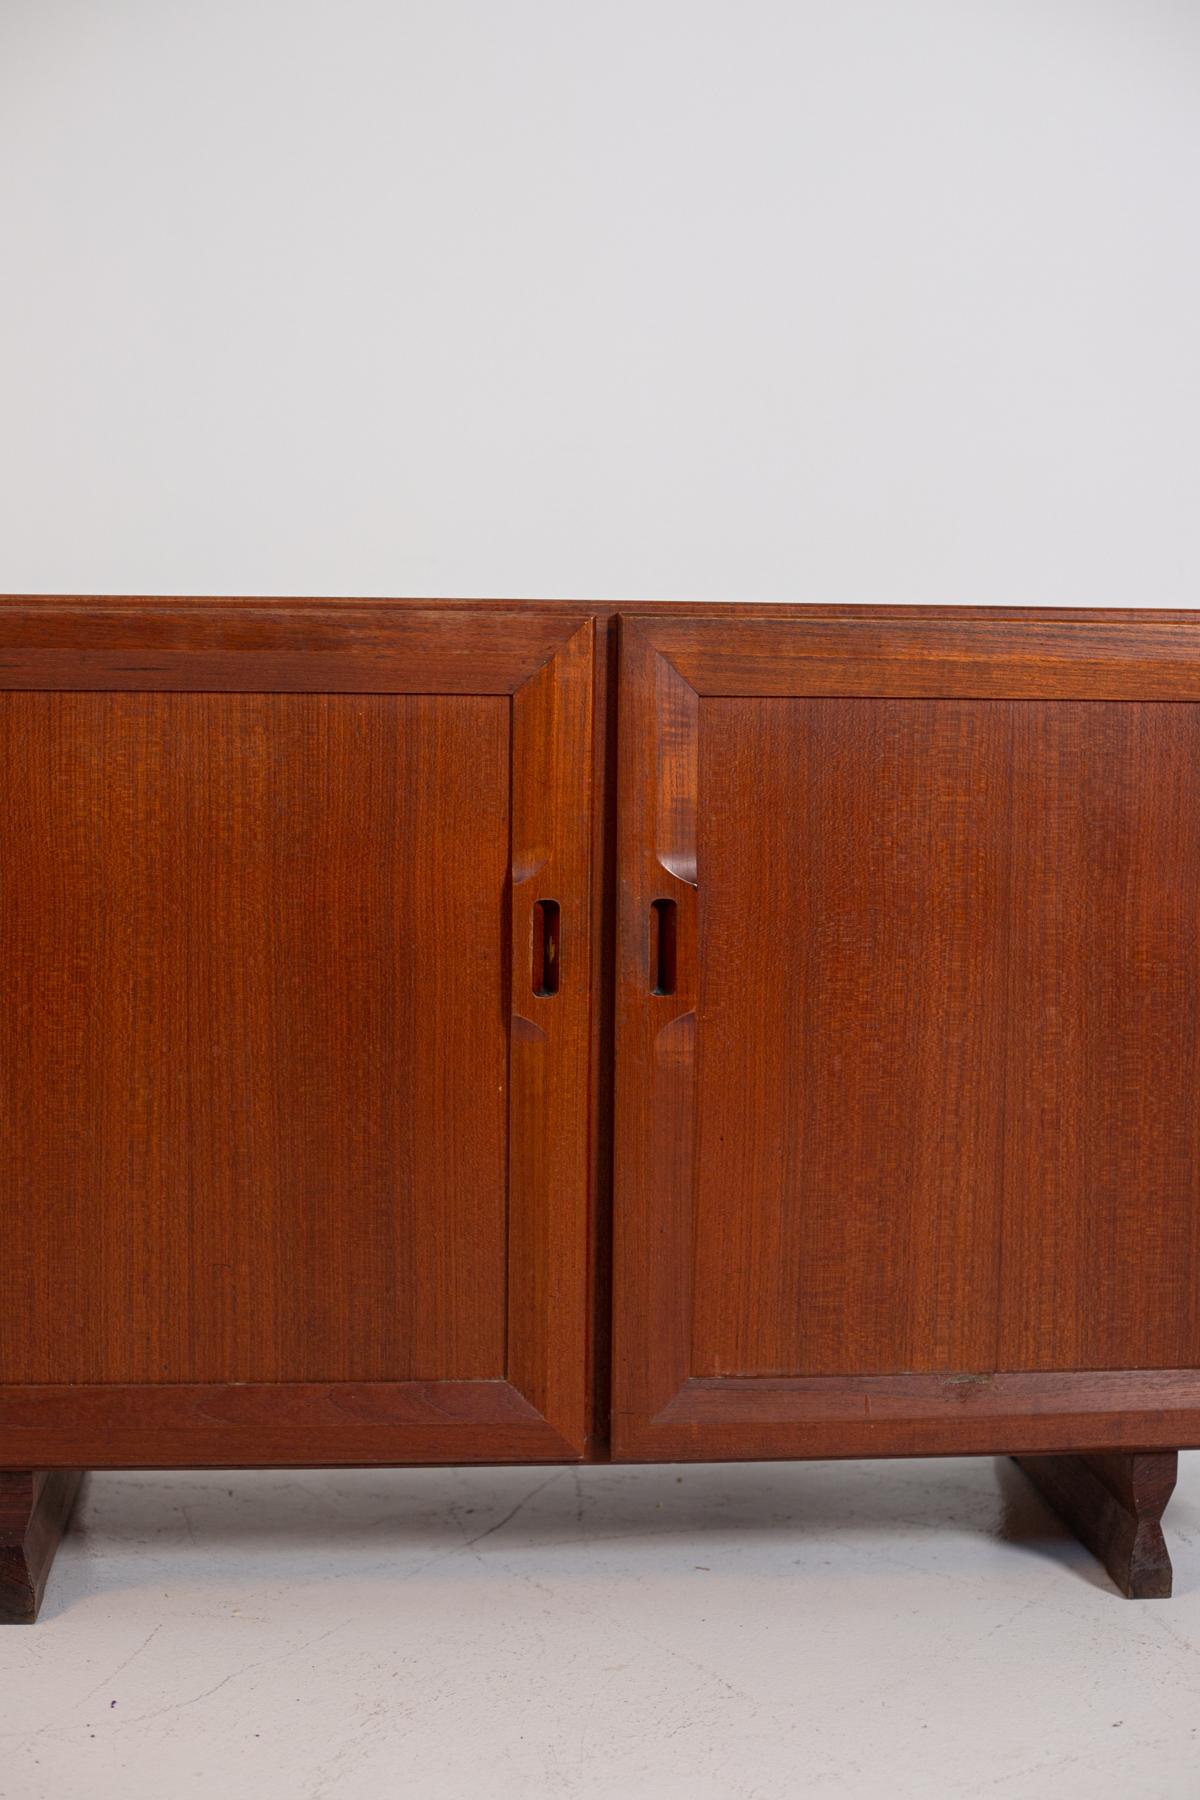 Pair of small walnut sideboards designed by Franco Albini in 1957 for the Poggi company. Model MB15, made entirely of wood, from the center because perfectly finished even on the back. The doors close with a magnet and have a wooden frame that